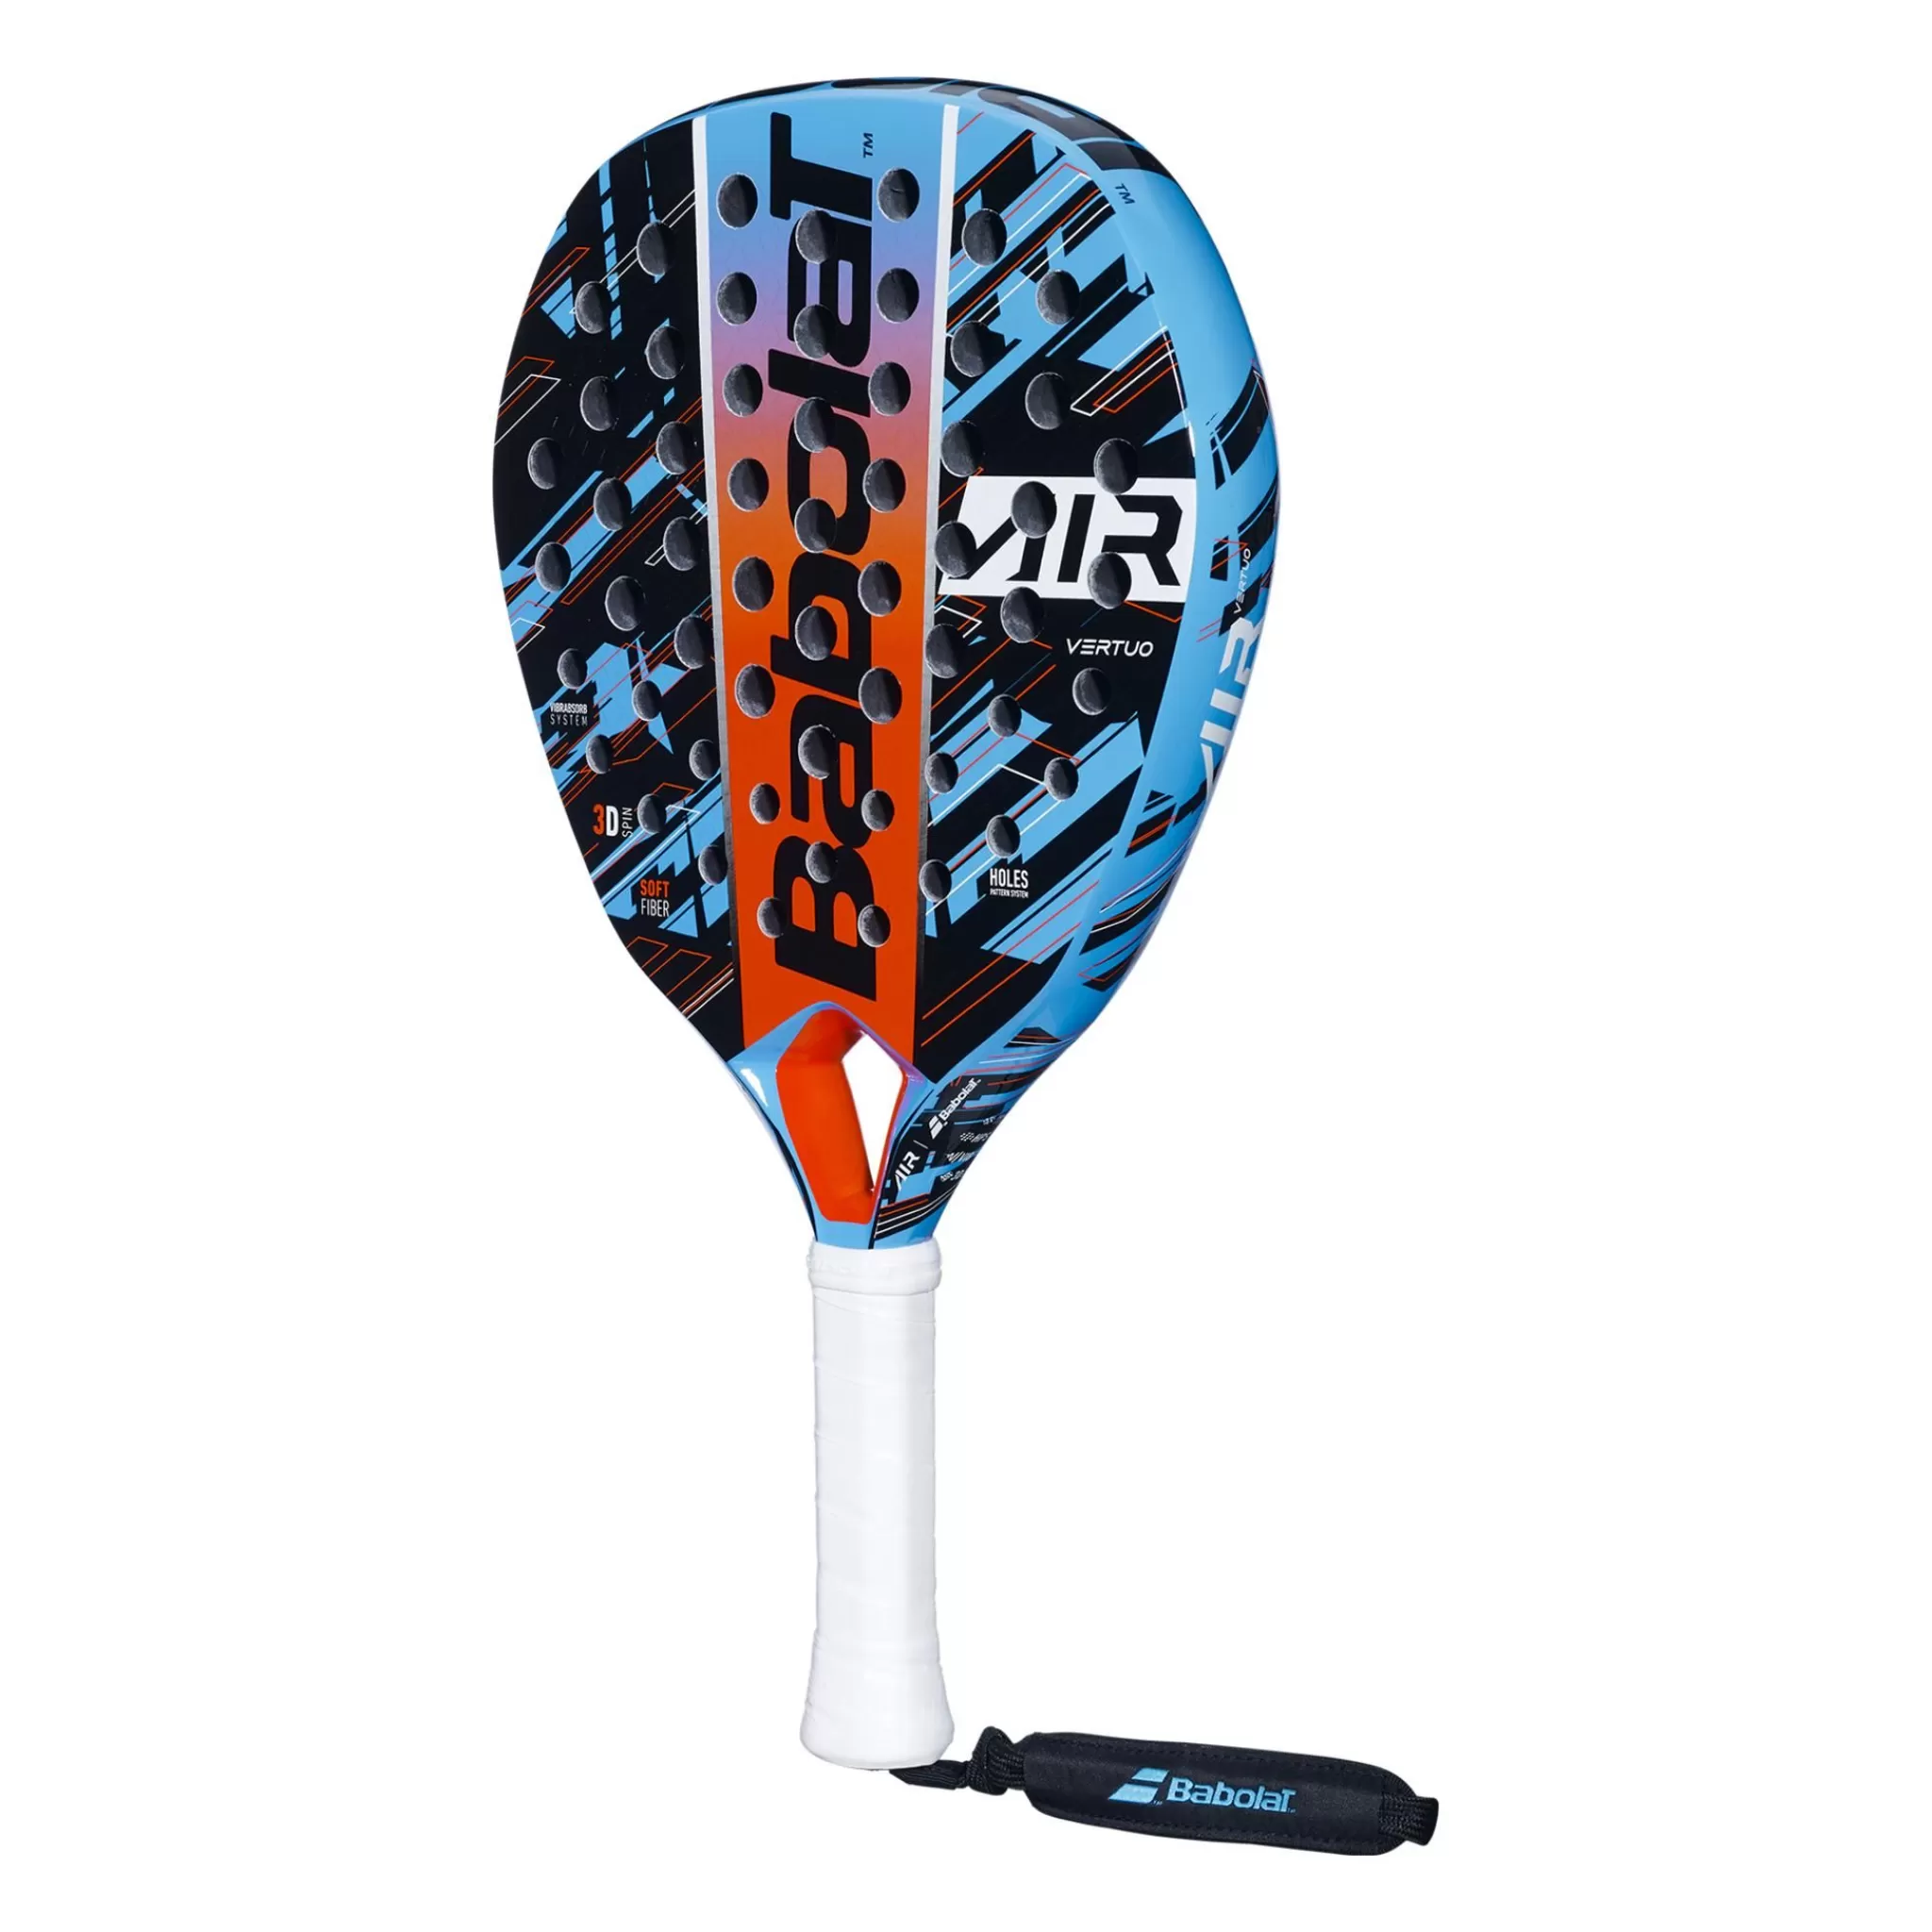 Discount babolat Vertuo Air 2023, Padelracket For Nybegynnere, Unisex